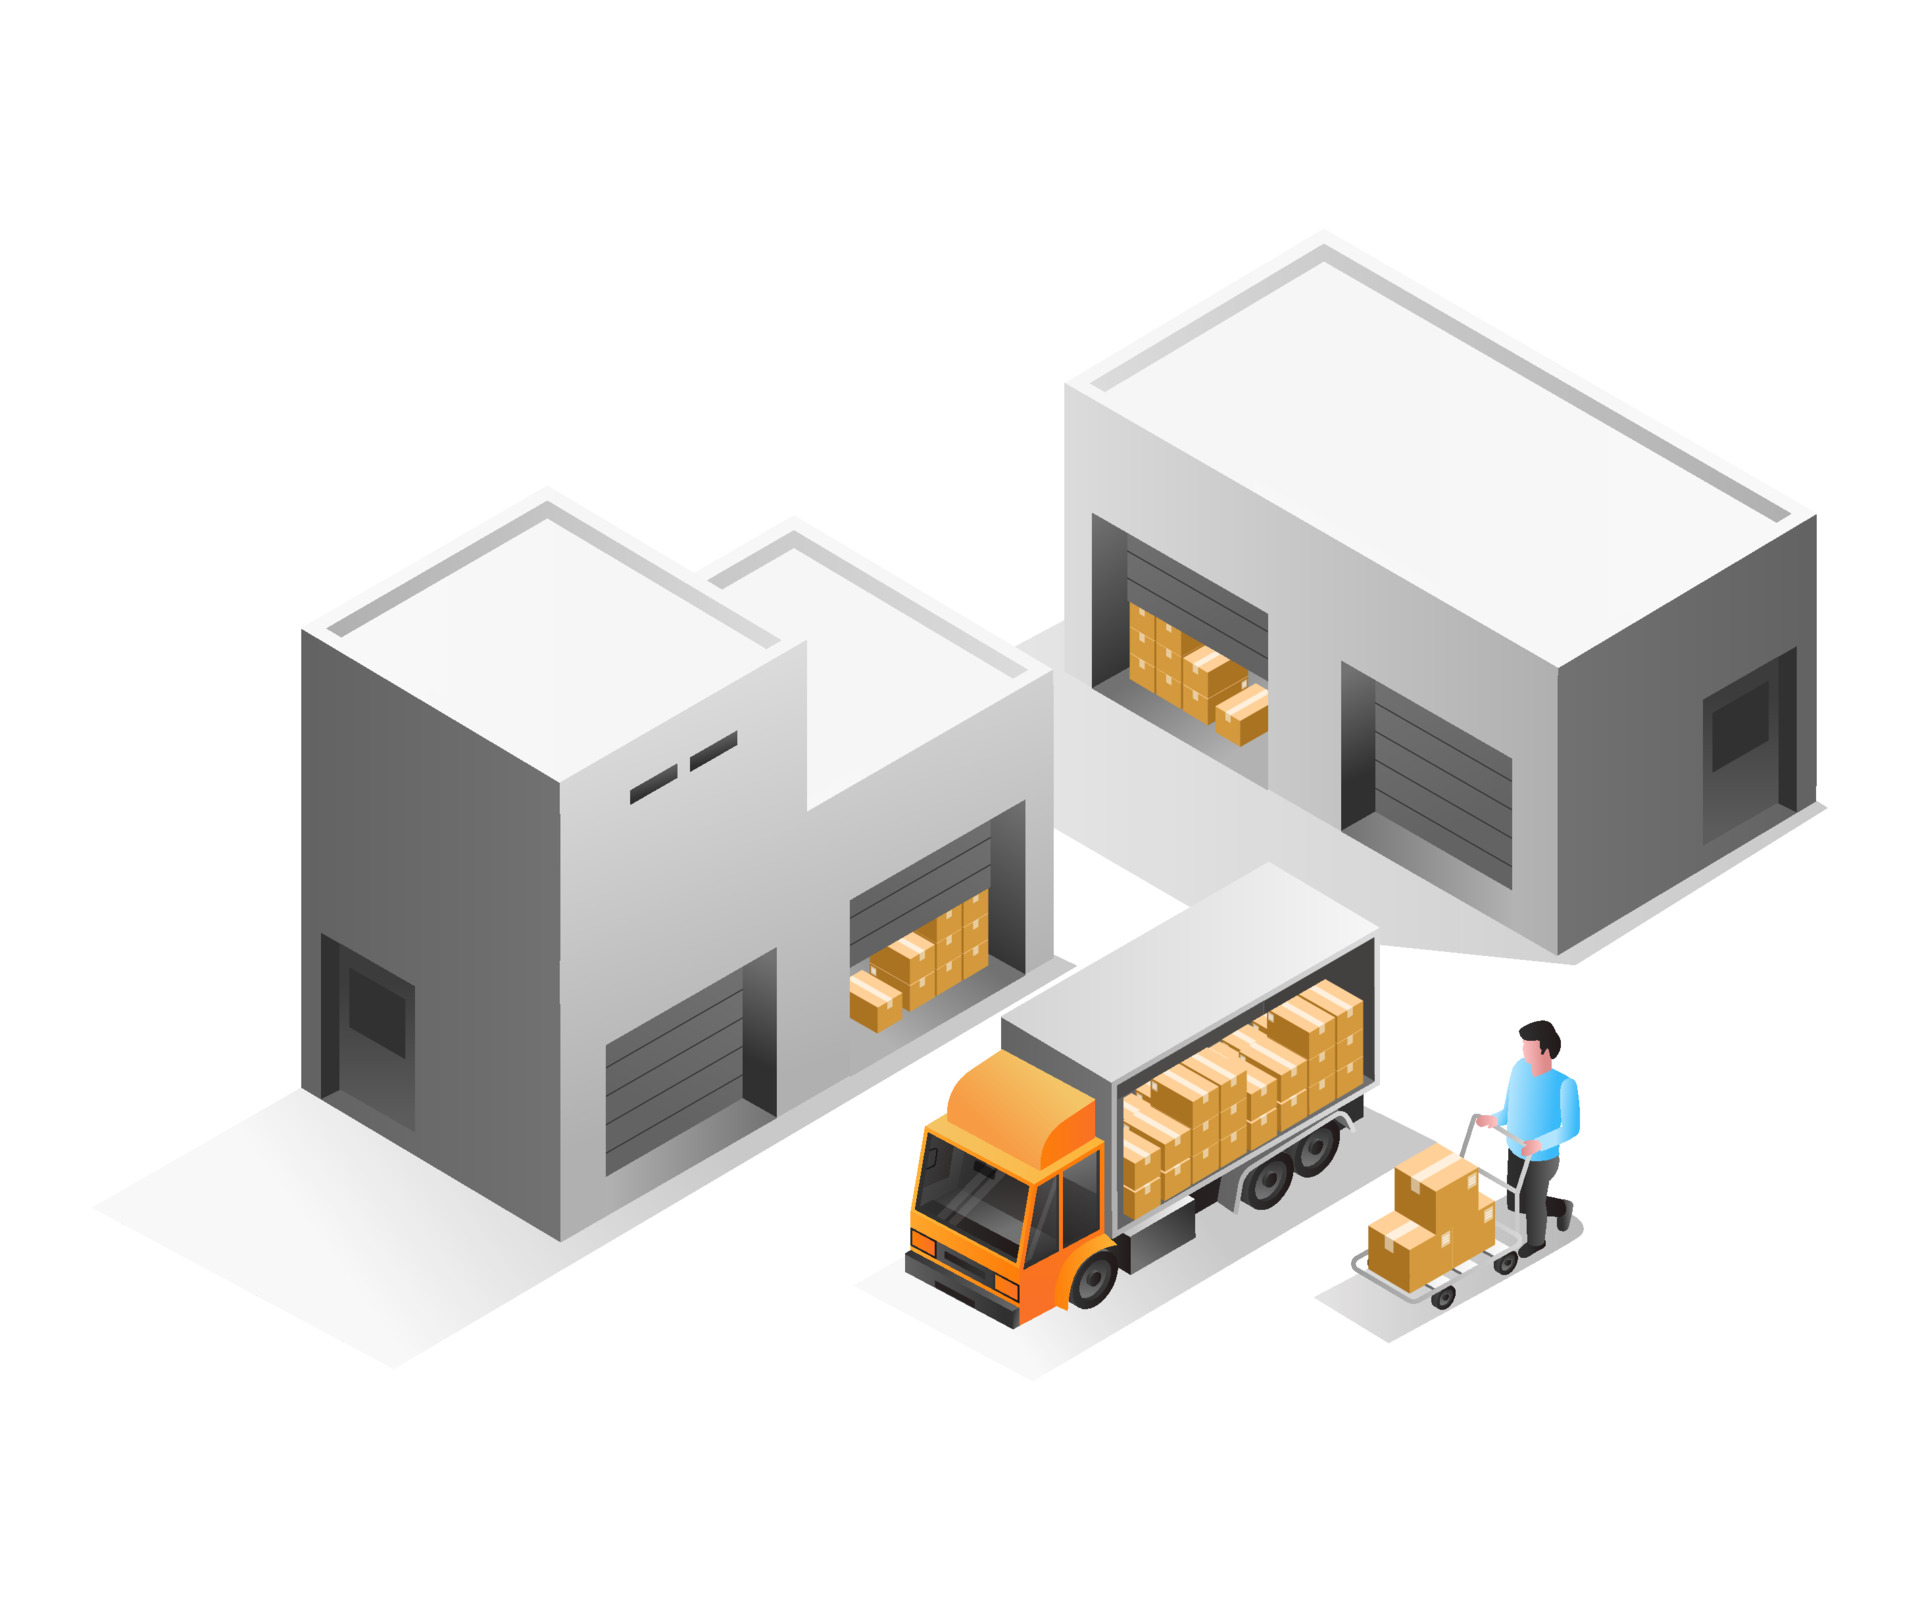 vecteezy_isometric-illustration-concept-warehouse-delivers-goods-to_5647962